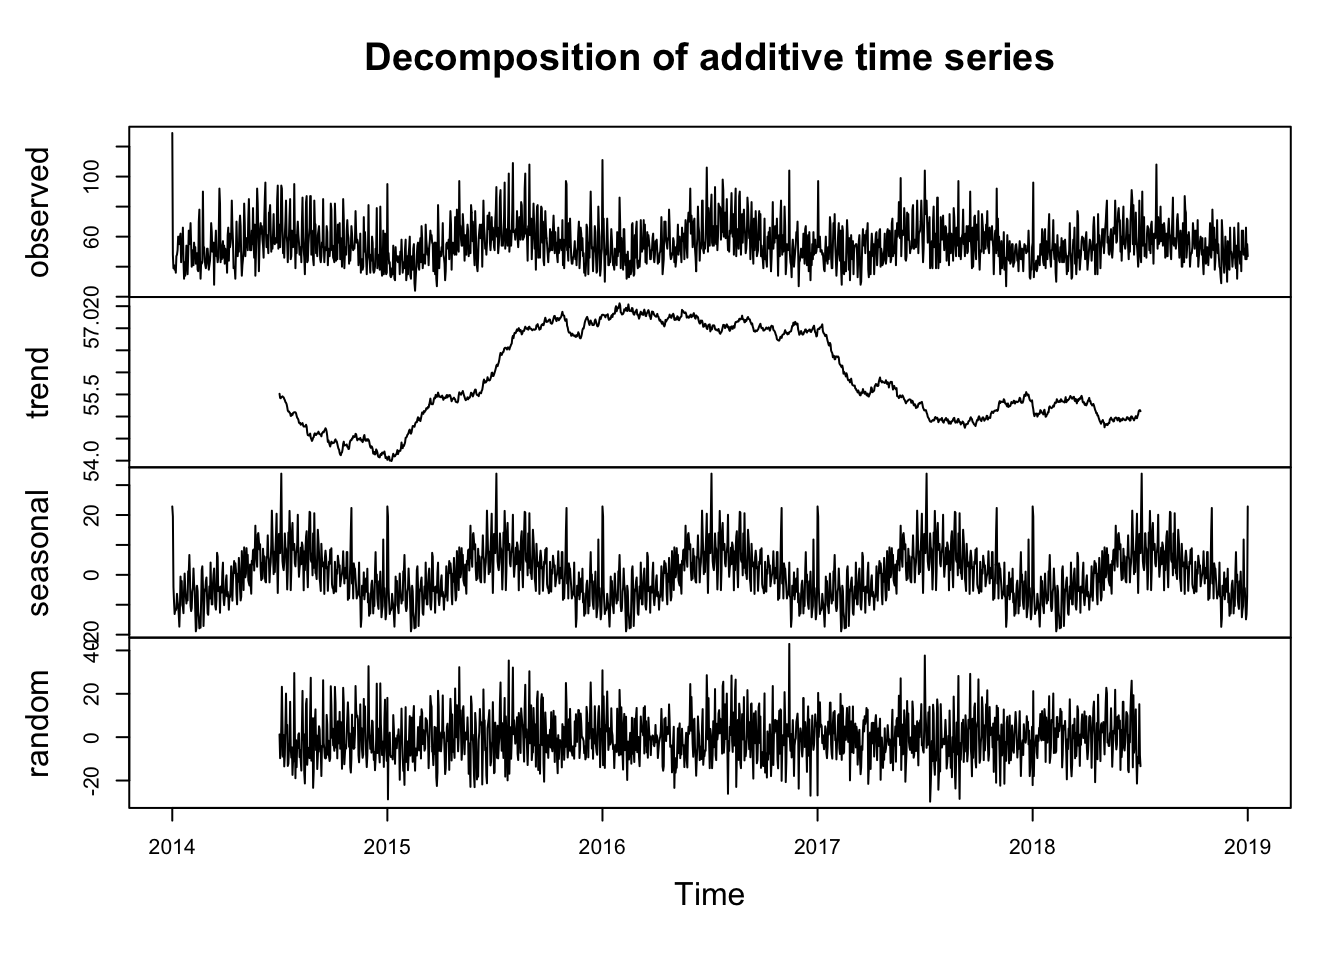 Another four plots tiled vertically, with the title 'Decomposition of additive time series'. The four plots' vertical axes are once again labeled 'observed', 'trend', 'seasonal', and 'random'. Of note is the 'trend' plot, which seems to stay low until 2015, then climb throughout the year, and plateau at a higher value until 2017, when it drops again. The 'seasonal' yearly periodic plot peaks in the middle of each year once again.